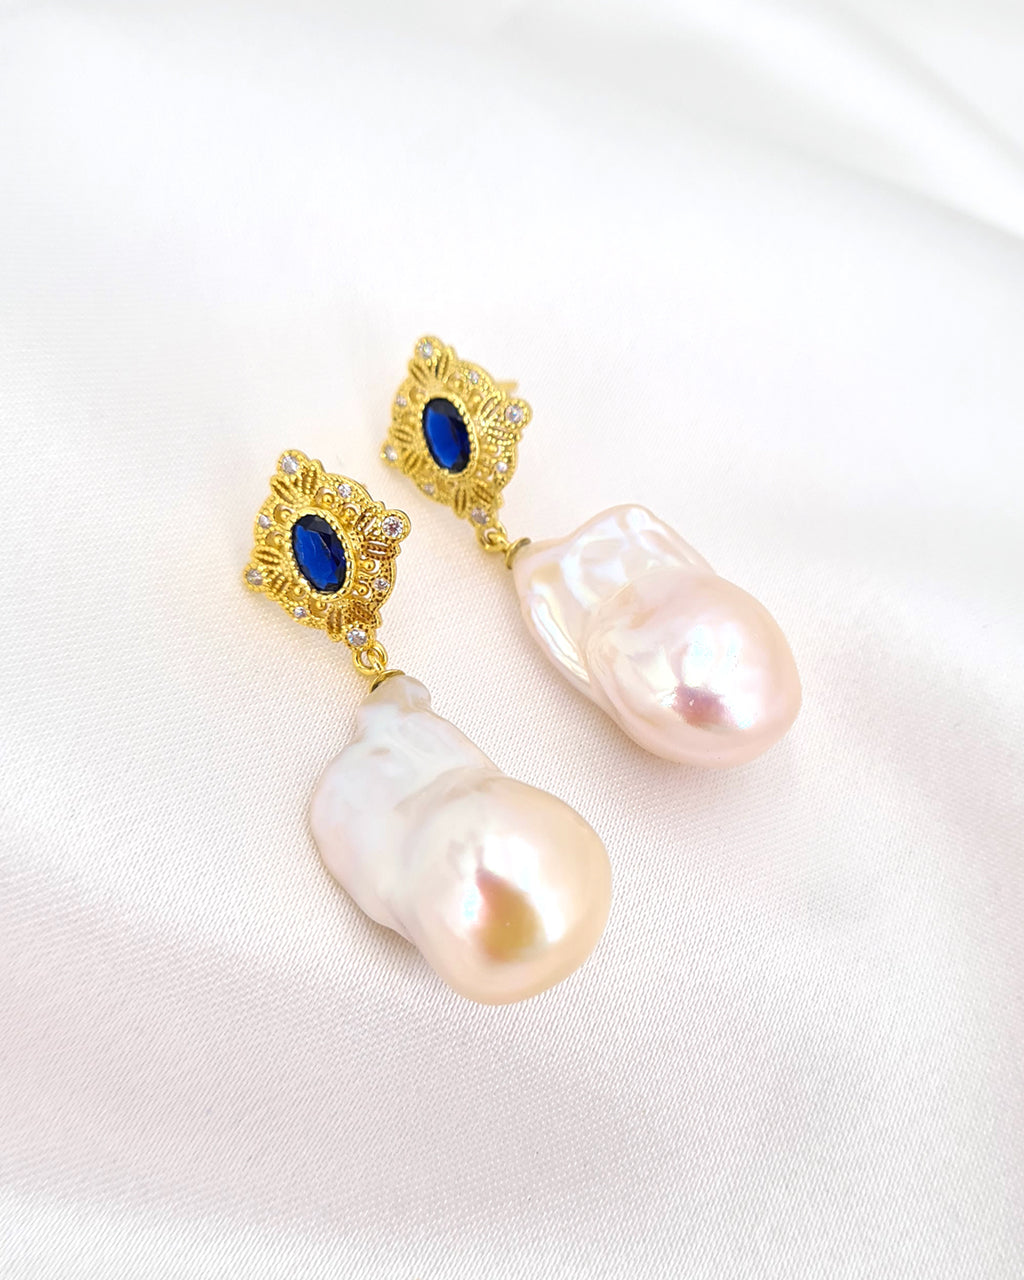 Large White Baroque Pearl Earrings - Vintage Style Gold Earrings - Glitz  And Love